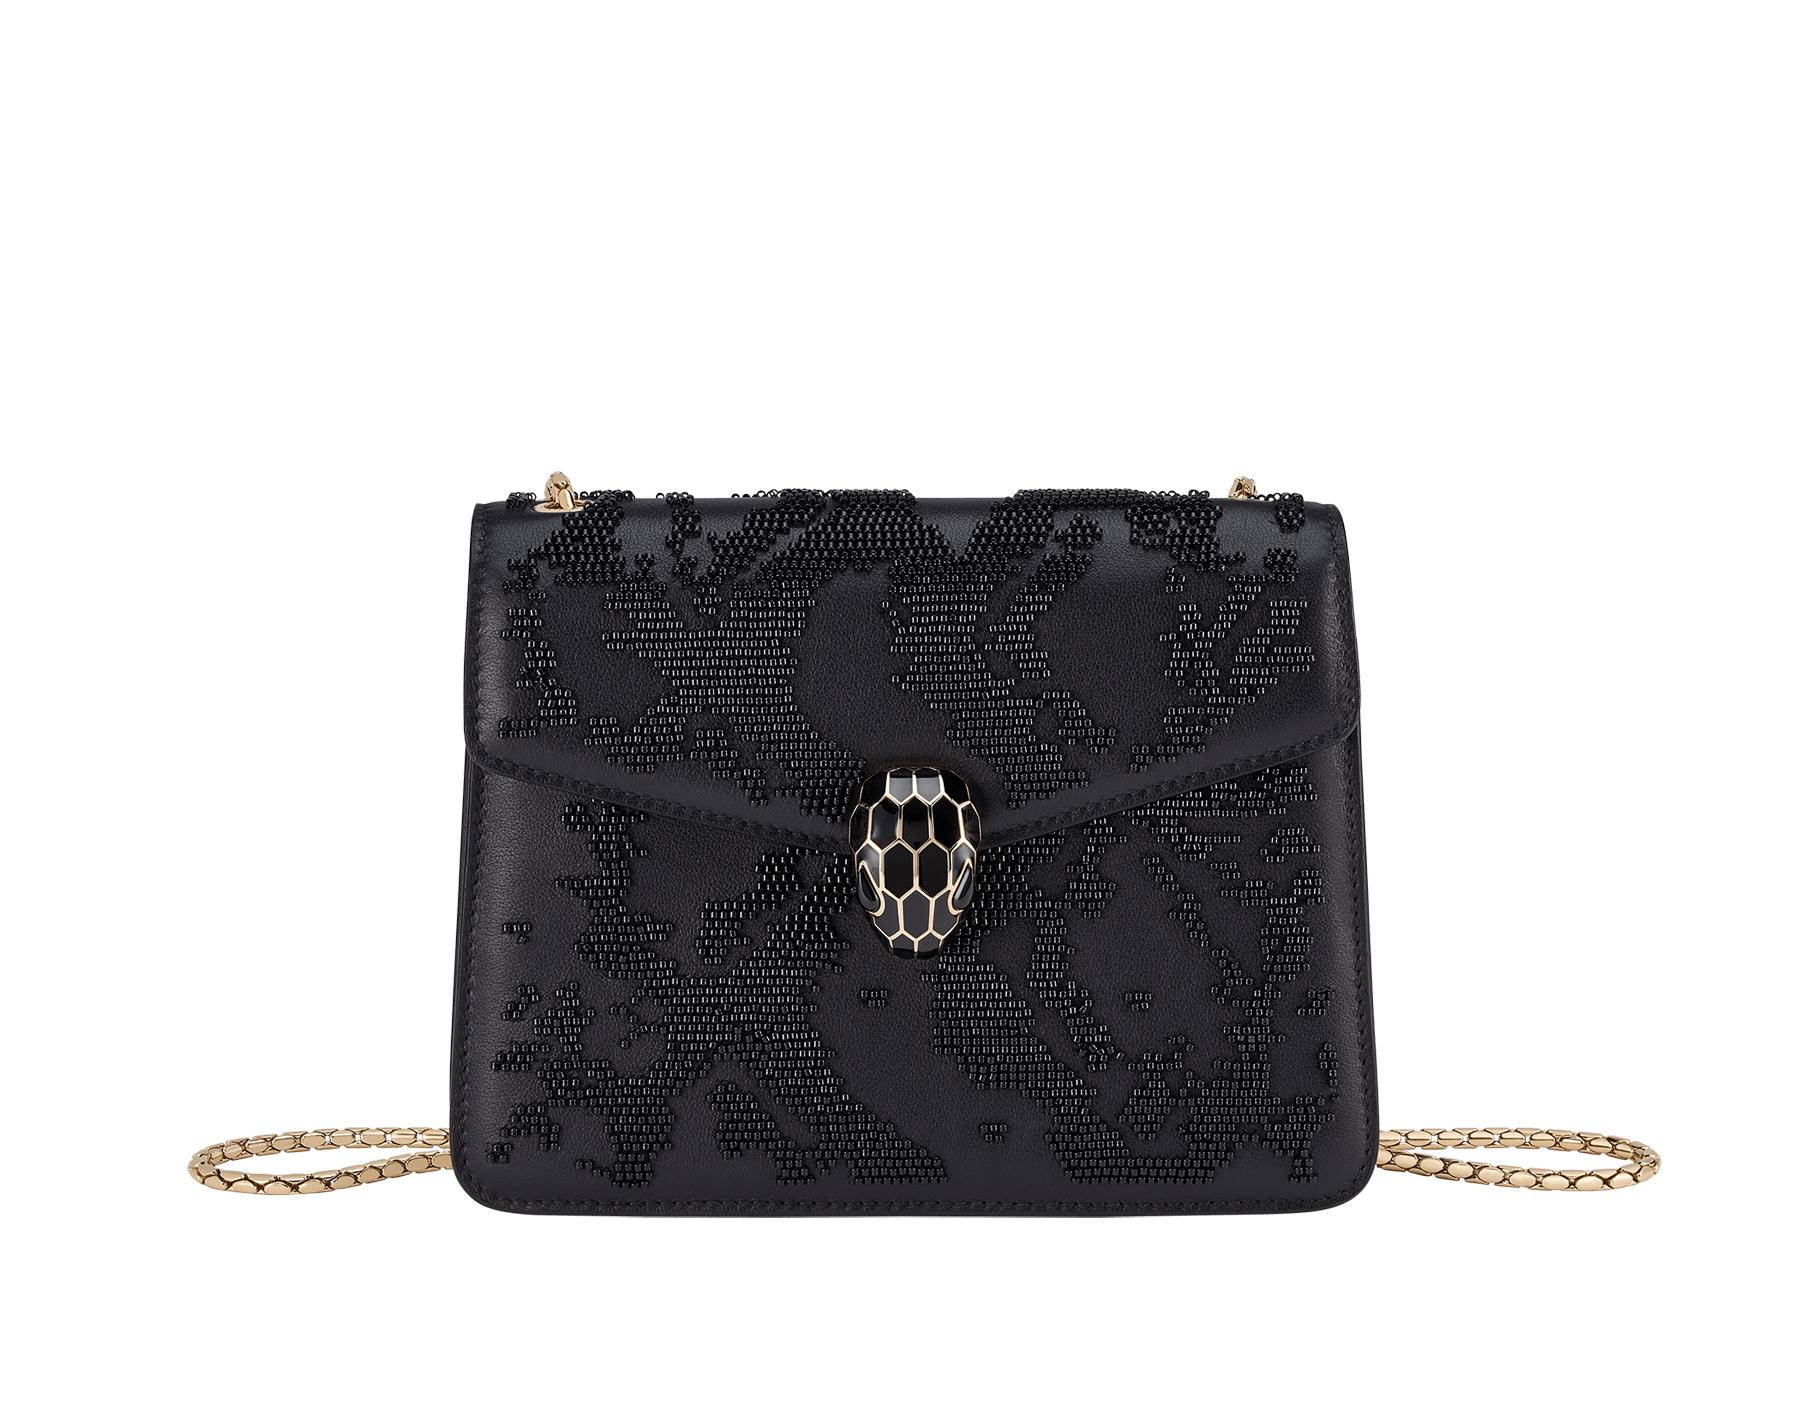 Serpenti Forever small crossbody bag in black Snake Invaders Metropolitan calf leather with a hand-sewn black glass beads embroidery and black nappa leather lining. Captivating snakehead magnetic closure in light gold-plated brass embellished with matte and shiny black enamel scales, and black onyx eyes. 292275 image 1